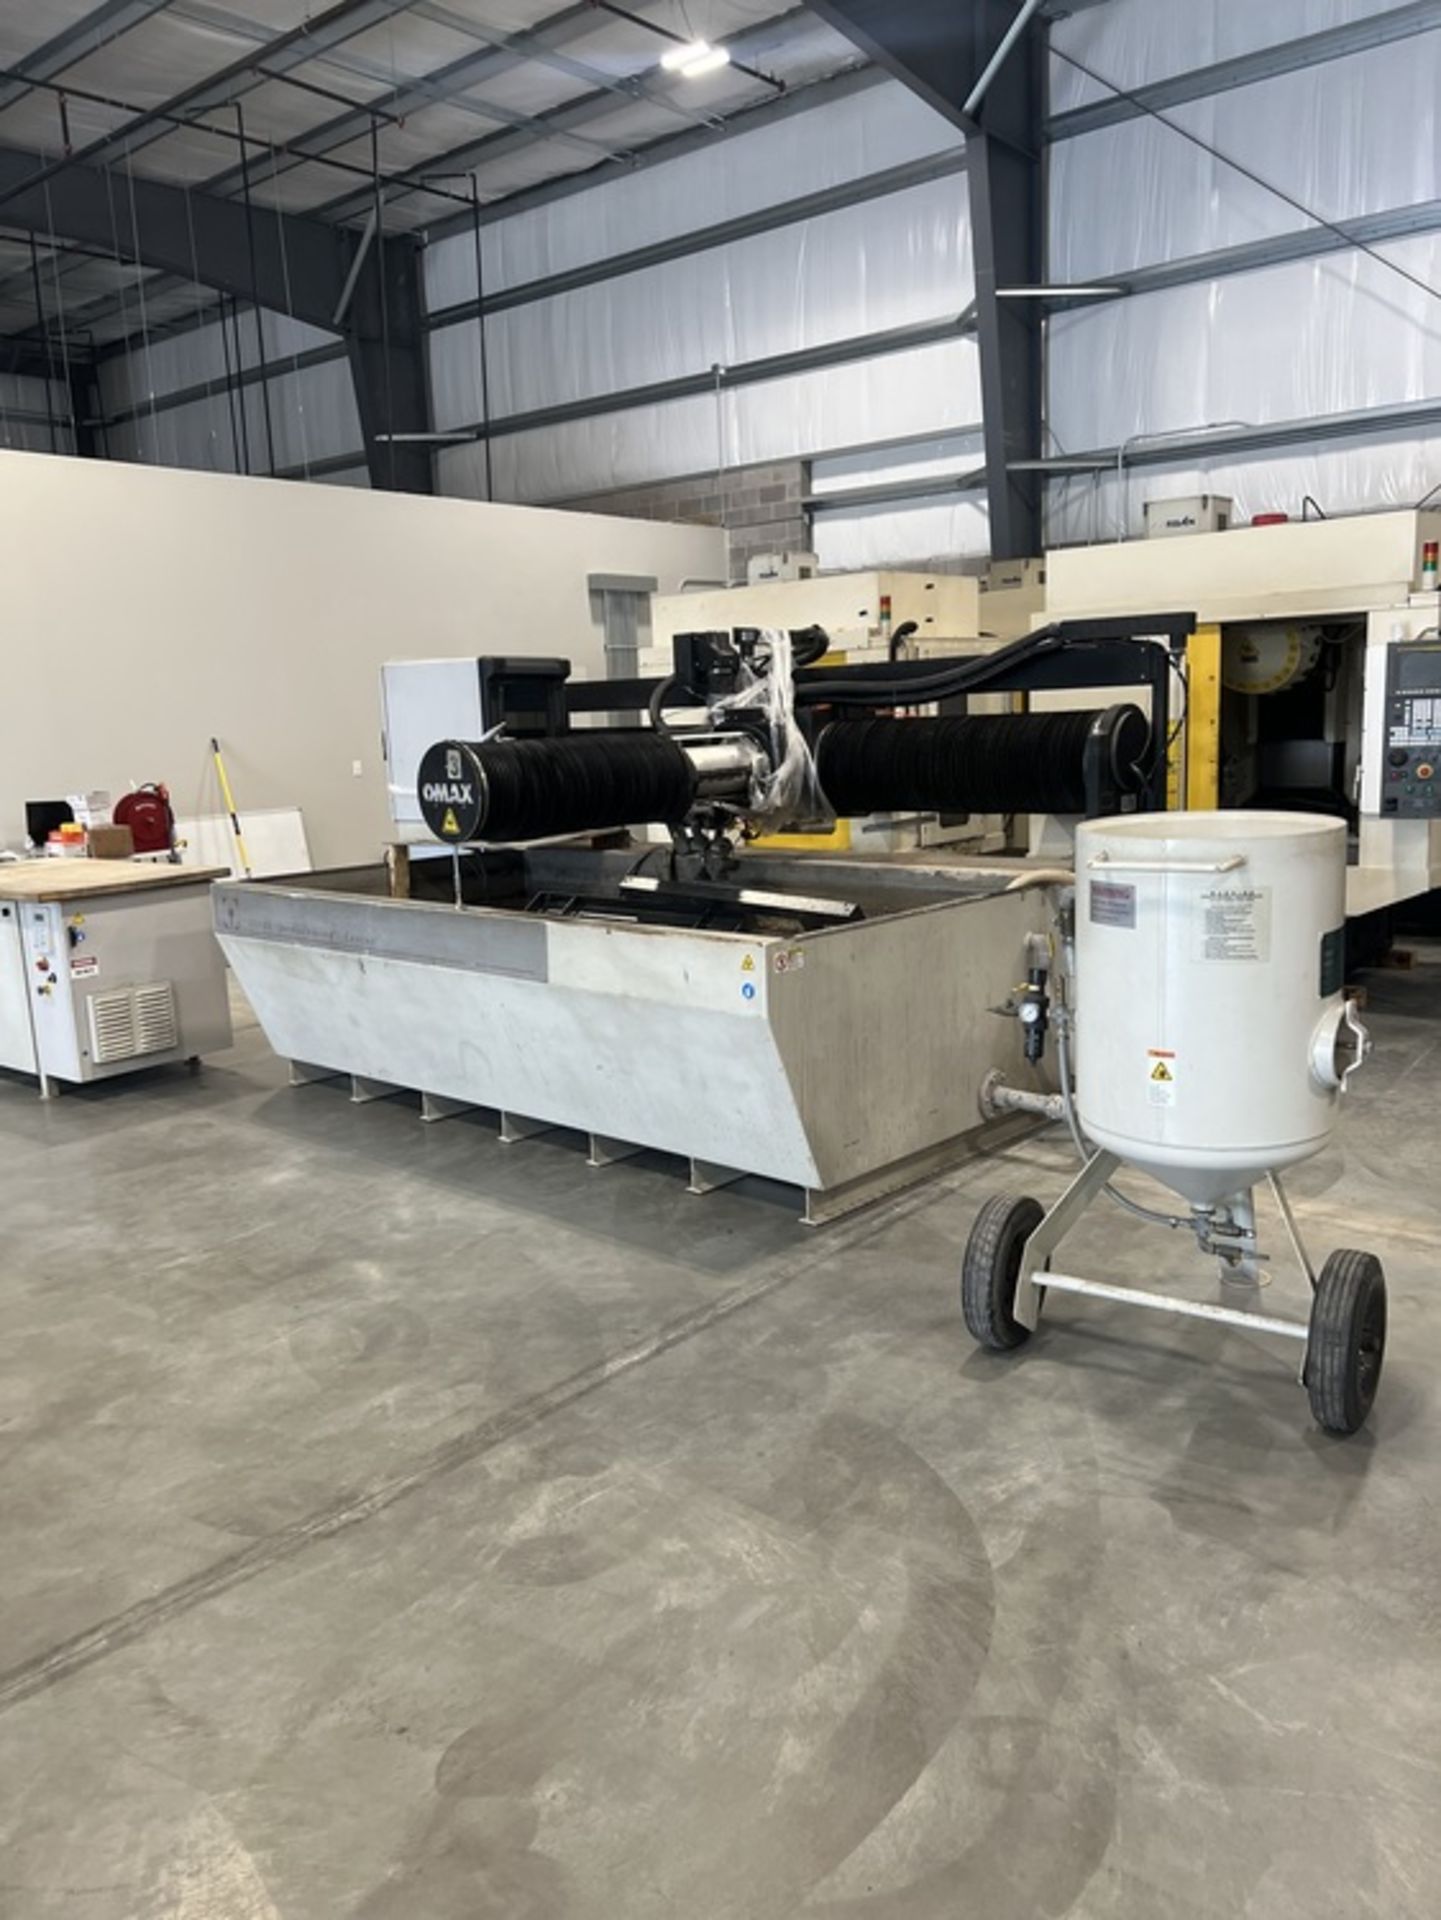 4' X 8' OMAX 55100 WATERJET; S/N B512079, 100" X-AXIS, 55" Y-AXIS, 8" Z-AXIS, 60,000 PSI (NEW 2007) - Image 2 of 6